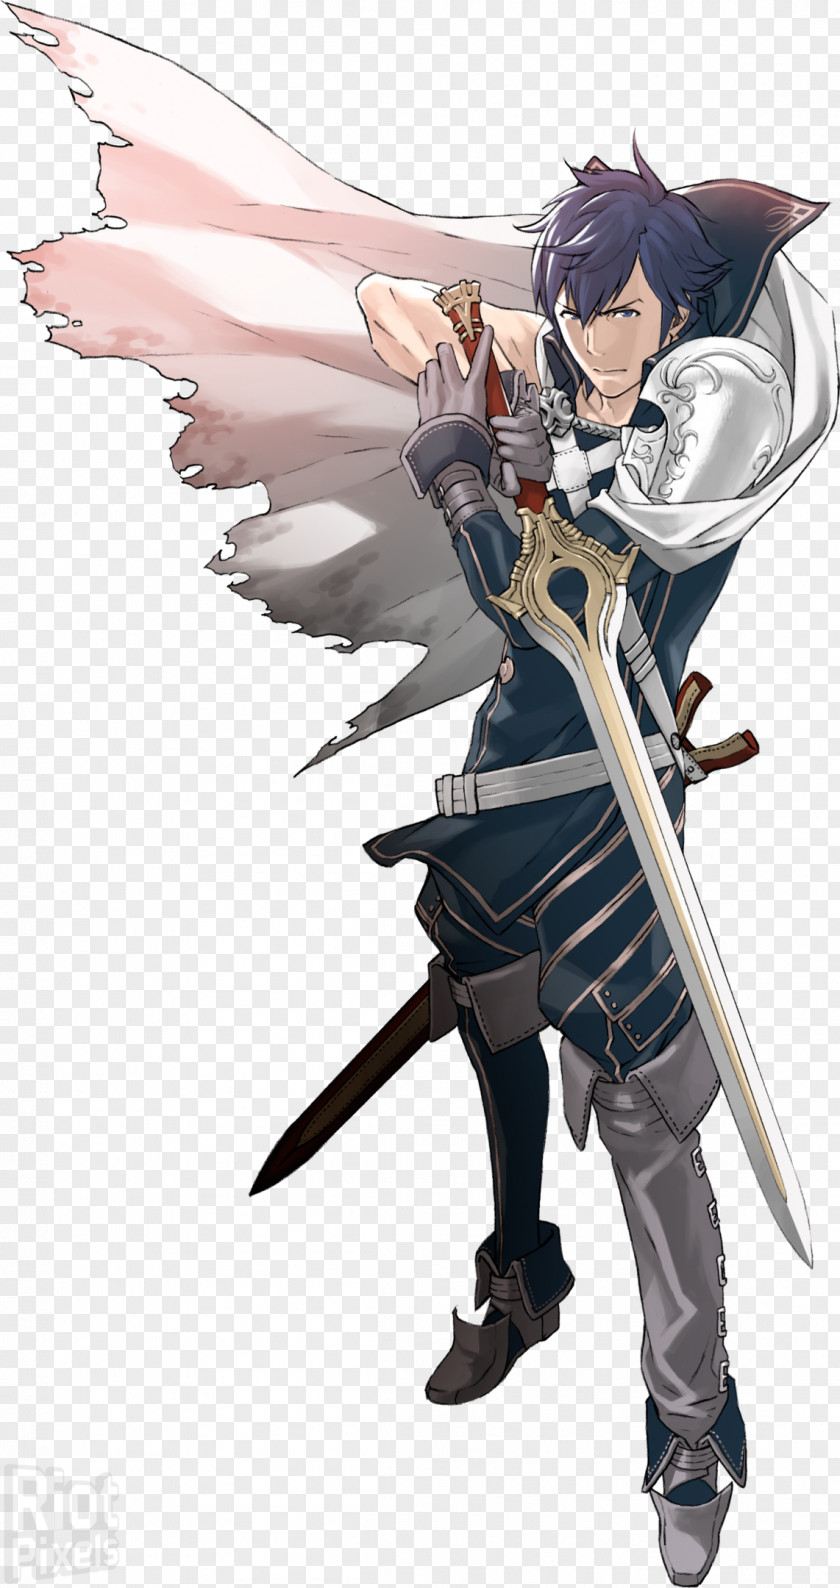 Armour Fire Emblem Awakening Fates Super Smash Bros. For Nintendo 3DS And Wii U Emblem: Mystery Of The Shadow Dragon PNG